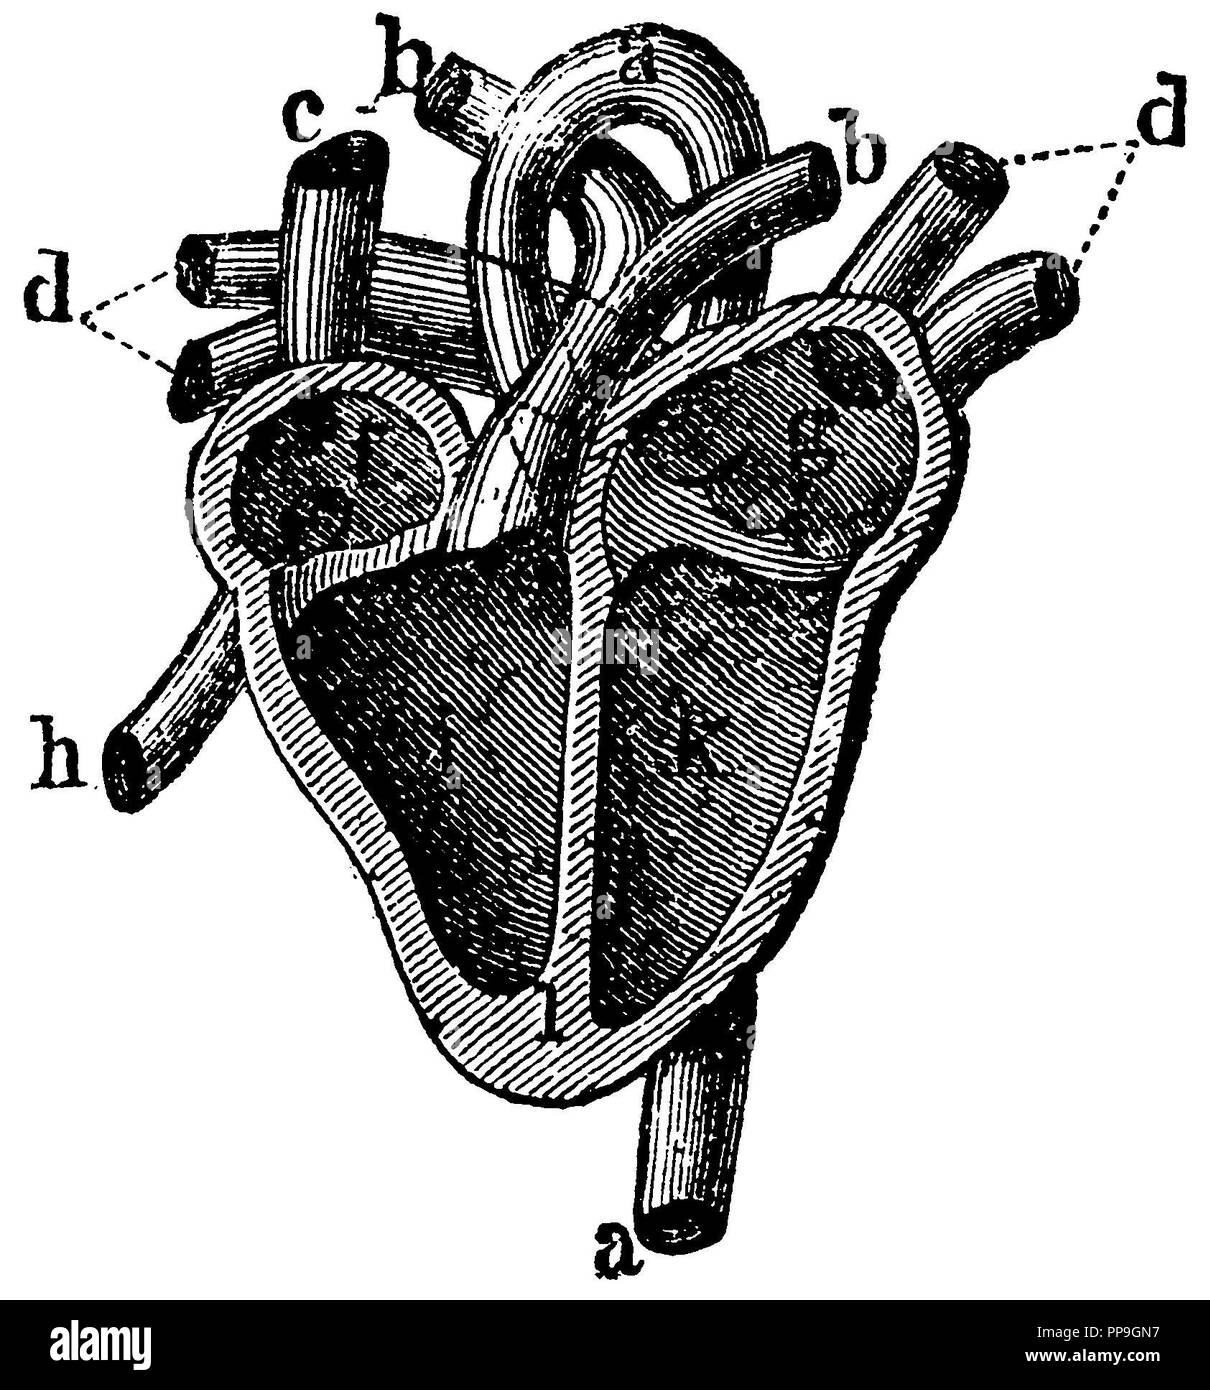 Human: section of the heart with the ascites a aorta, b pulmonary artery c superior vena cava d lunar veins f right anterior chamber g left anterior chamber h inferior vena cava i right ventricle k left ventricle l septum, anonym  1877 Stock Photo